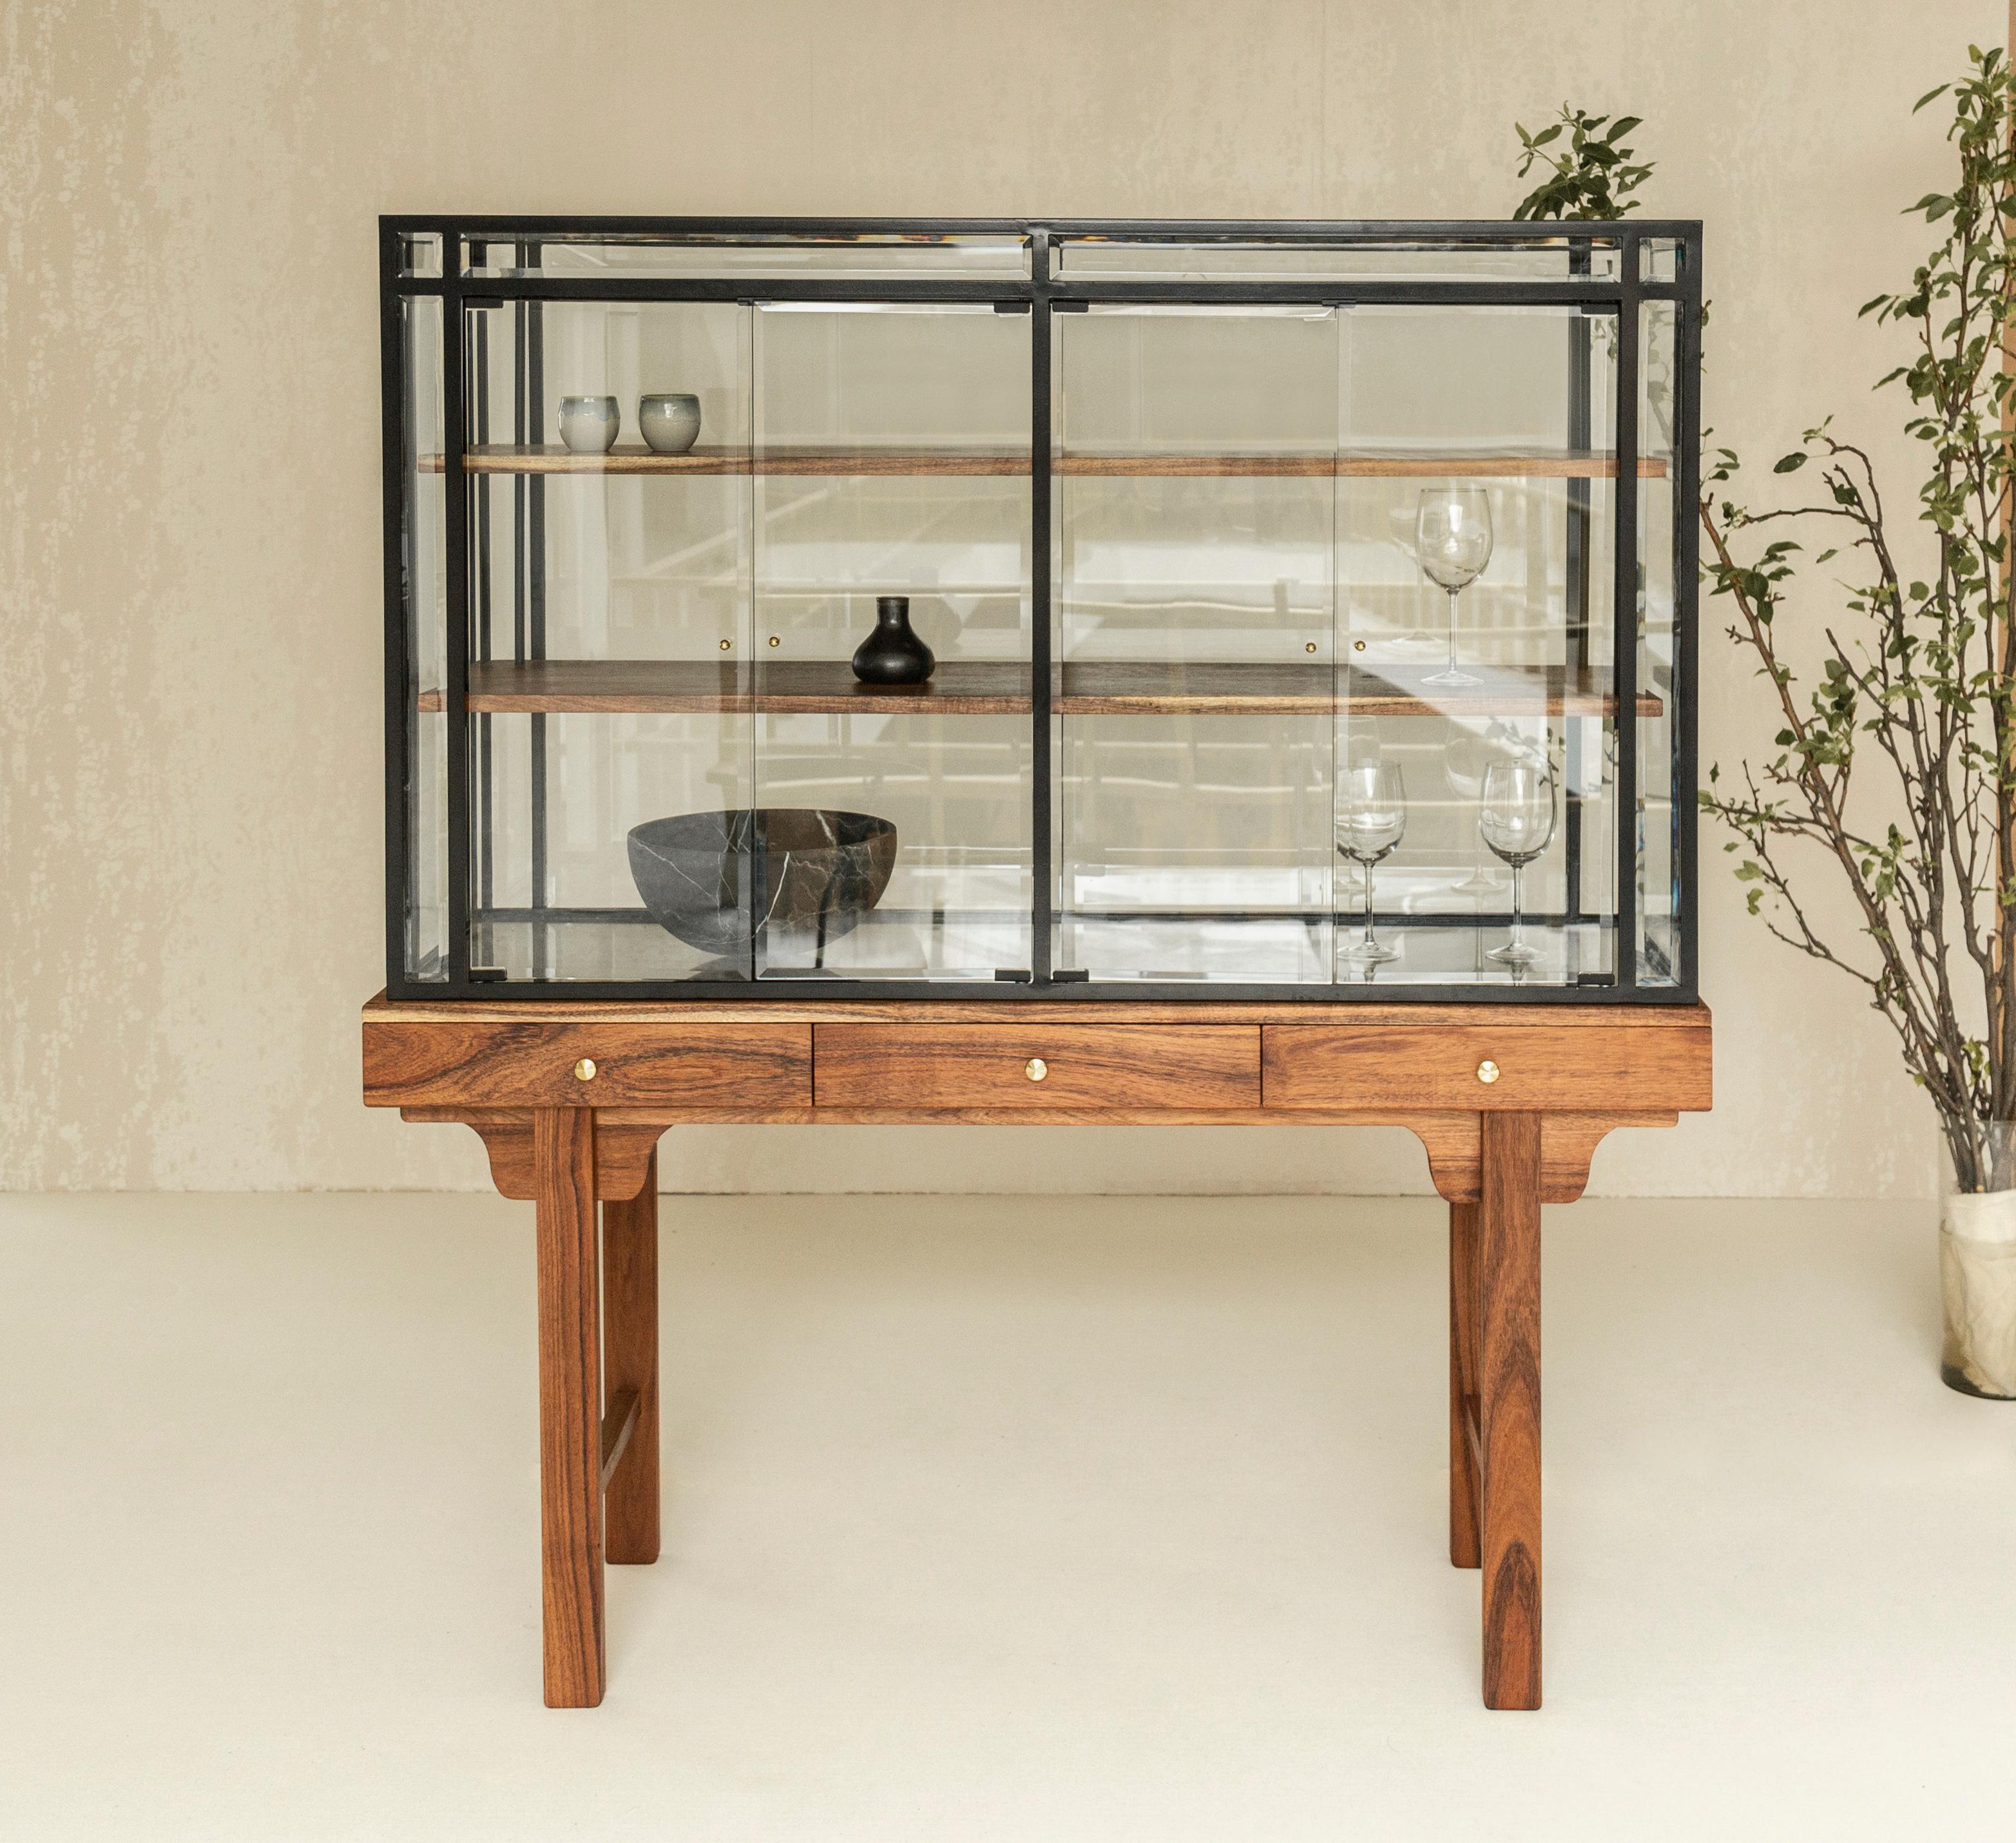 The Lloyd cabinet is inspired by antique chinese cabinets and glass work. It is made with a Mexican wood called Tzalam and the iron cabinet is crafted by the most skilled artisans. It is a combination of materials that likes to call attention and is